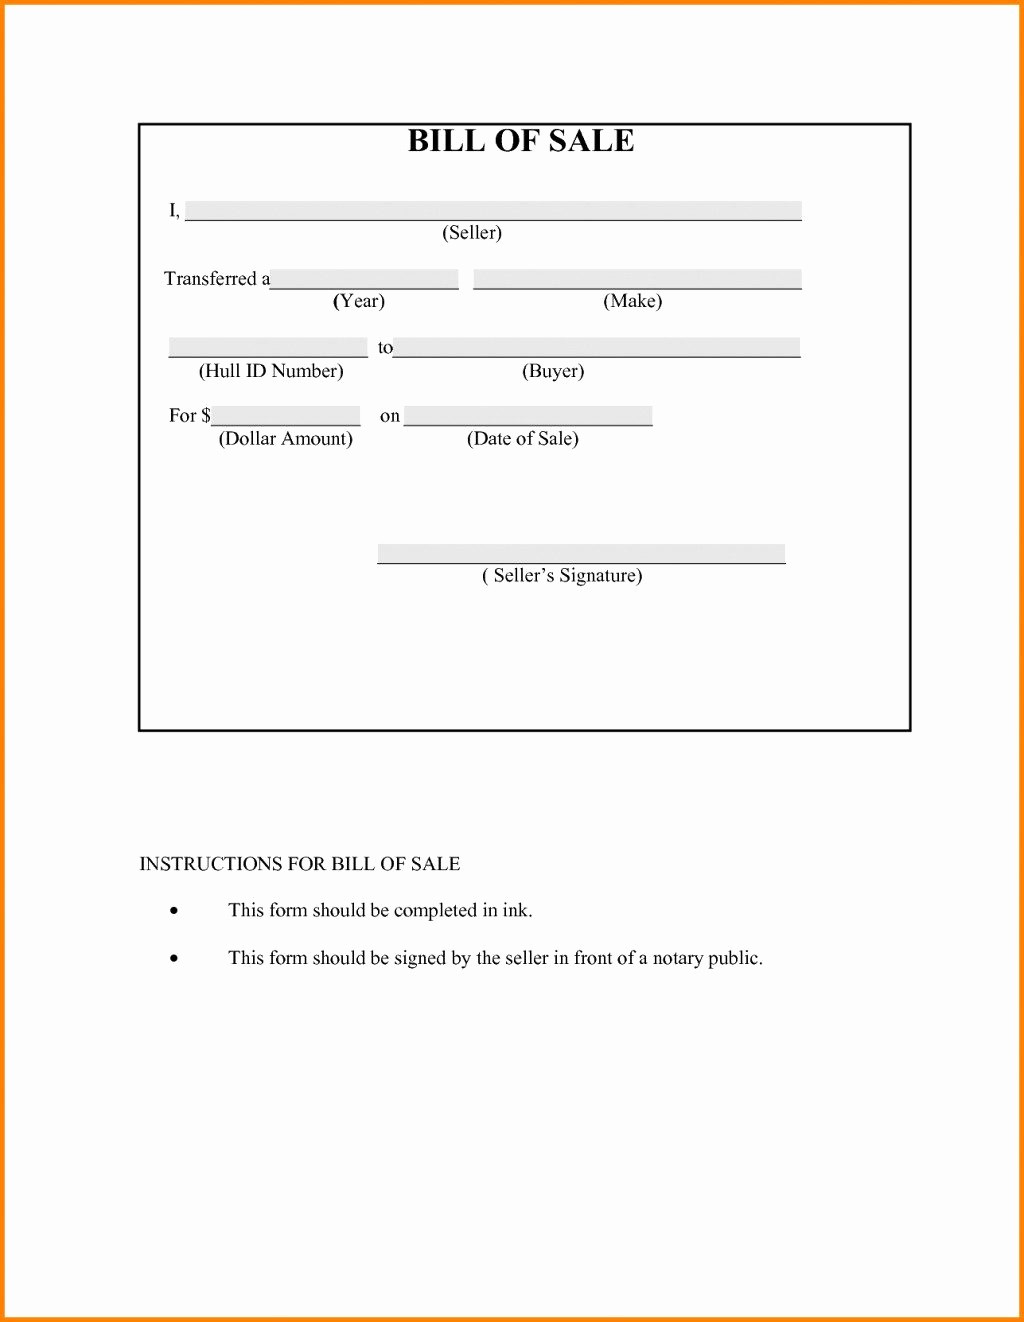 Simple Bill Of Sale Example Awesome atv Bill Sale Template Simple formable Elegant Free